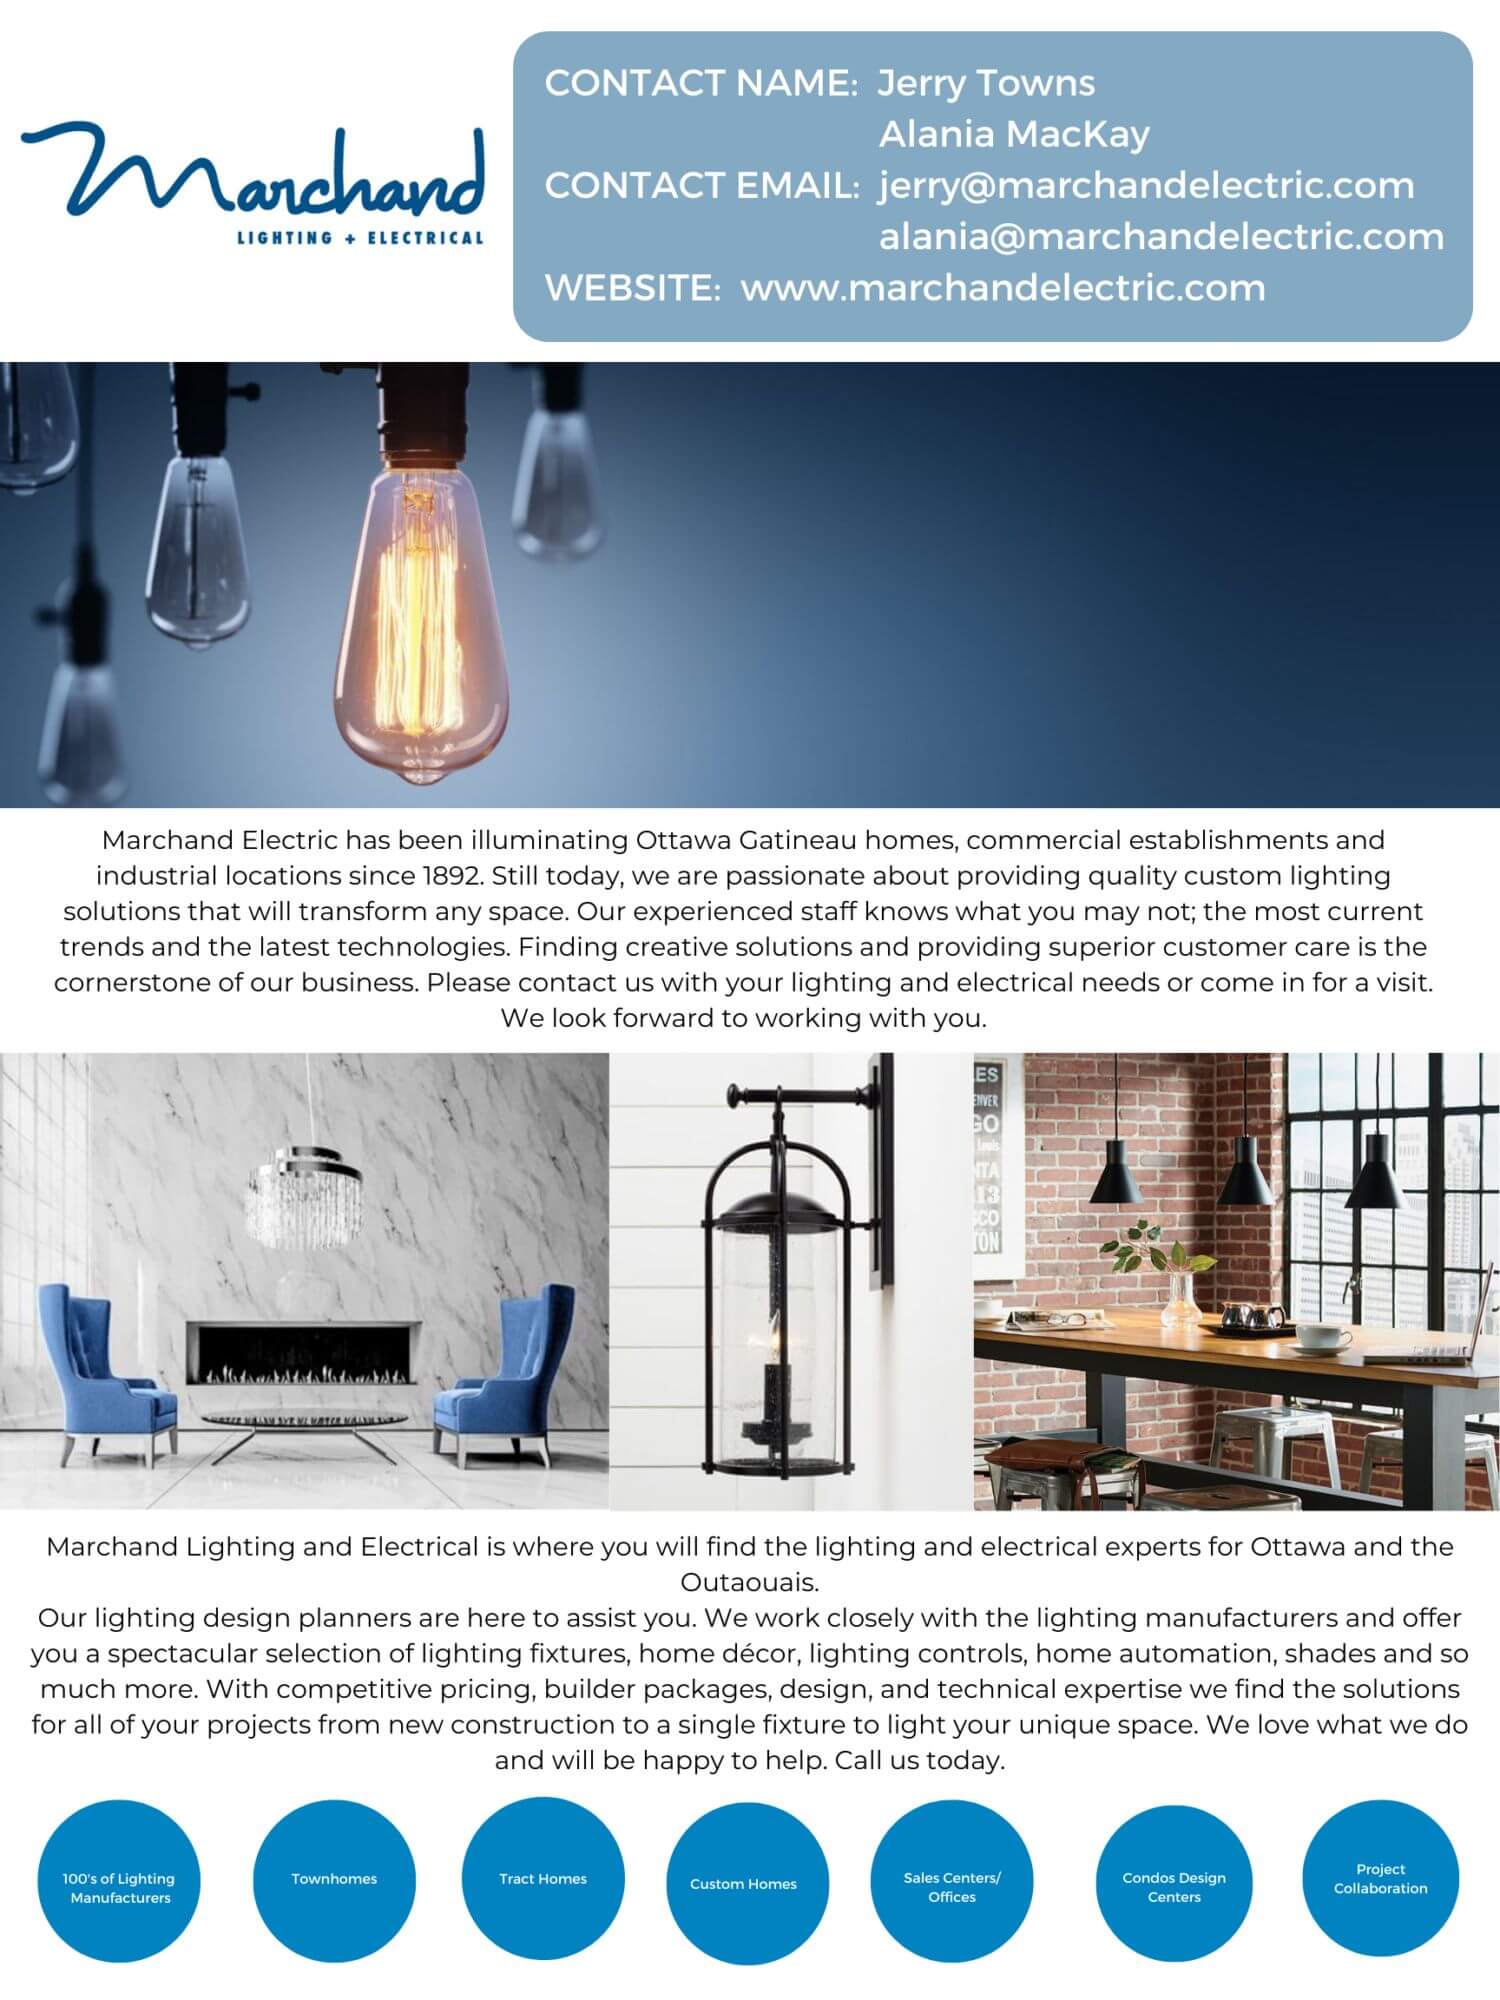 Marchand Lighting & Electrical